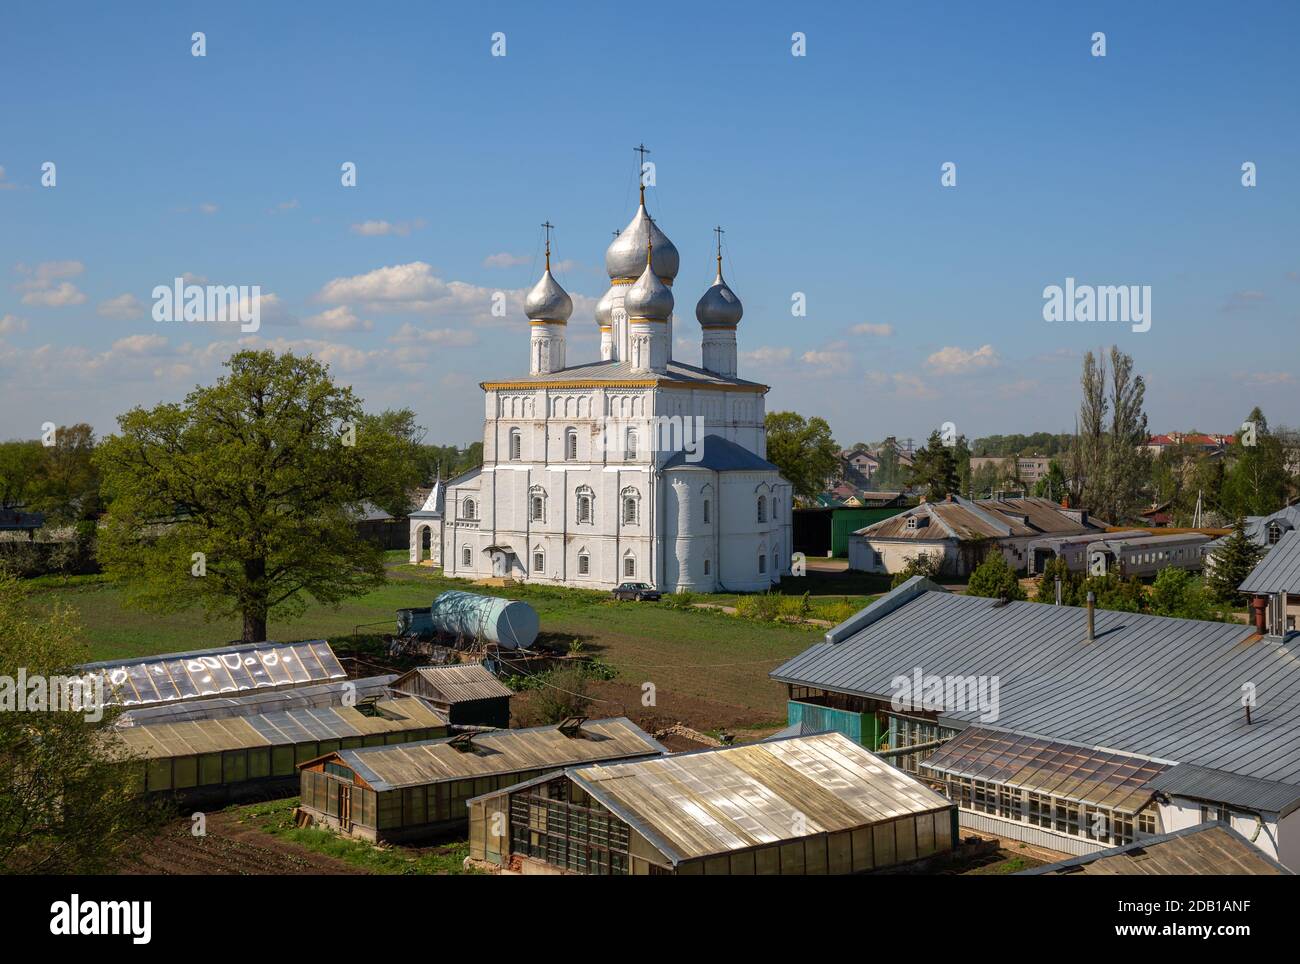 Spaso-Yakovlevsky Monastery. Church of the Transfiguration of the Savior and the household yard of the monastery. Rostov Veliky, Golden Ring of Russia Stock Photo